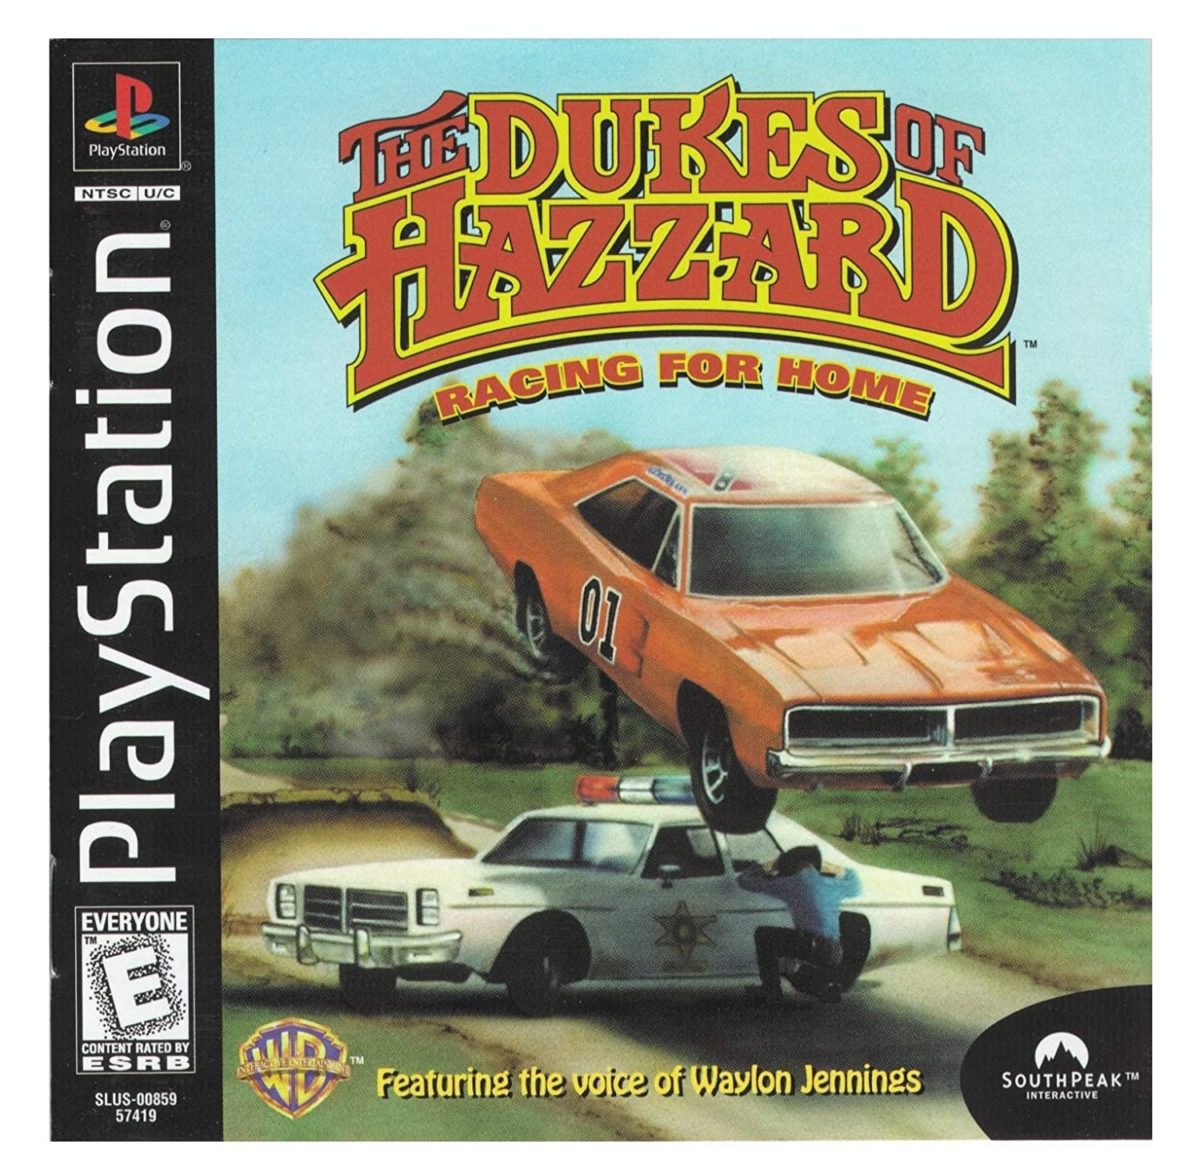 The Dukes of Hazzard: Racing for Home player count stats